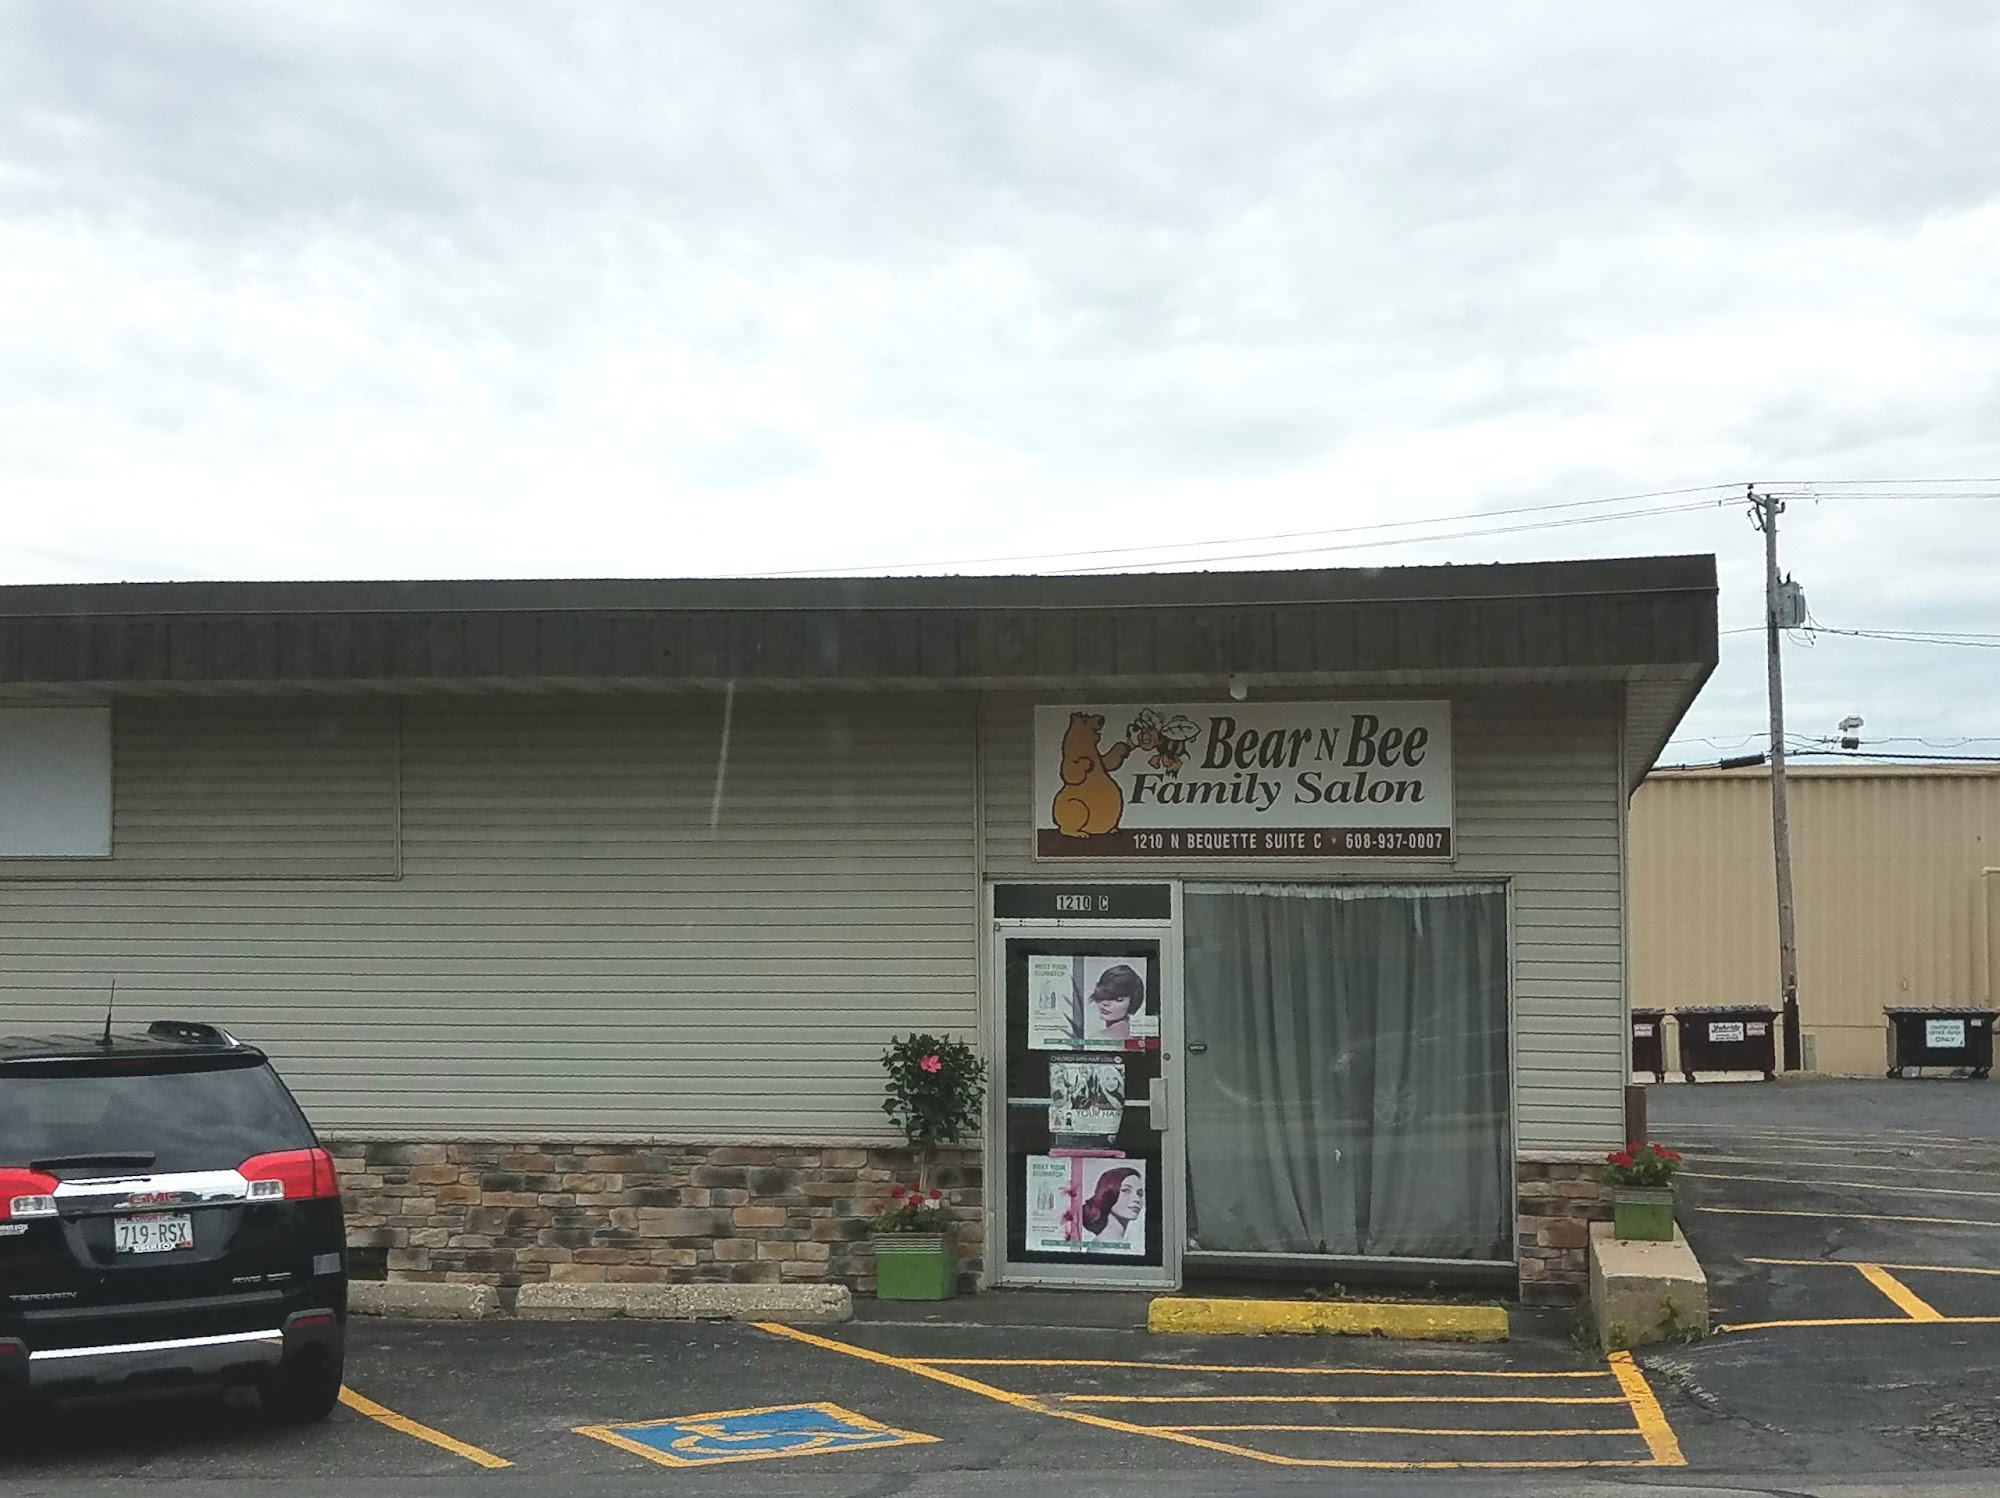 Bear N Bee Family Salon 1210 N Bequette St # C, Dodgeville Wisconsin 53533